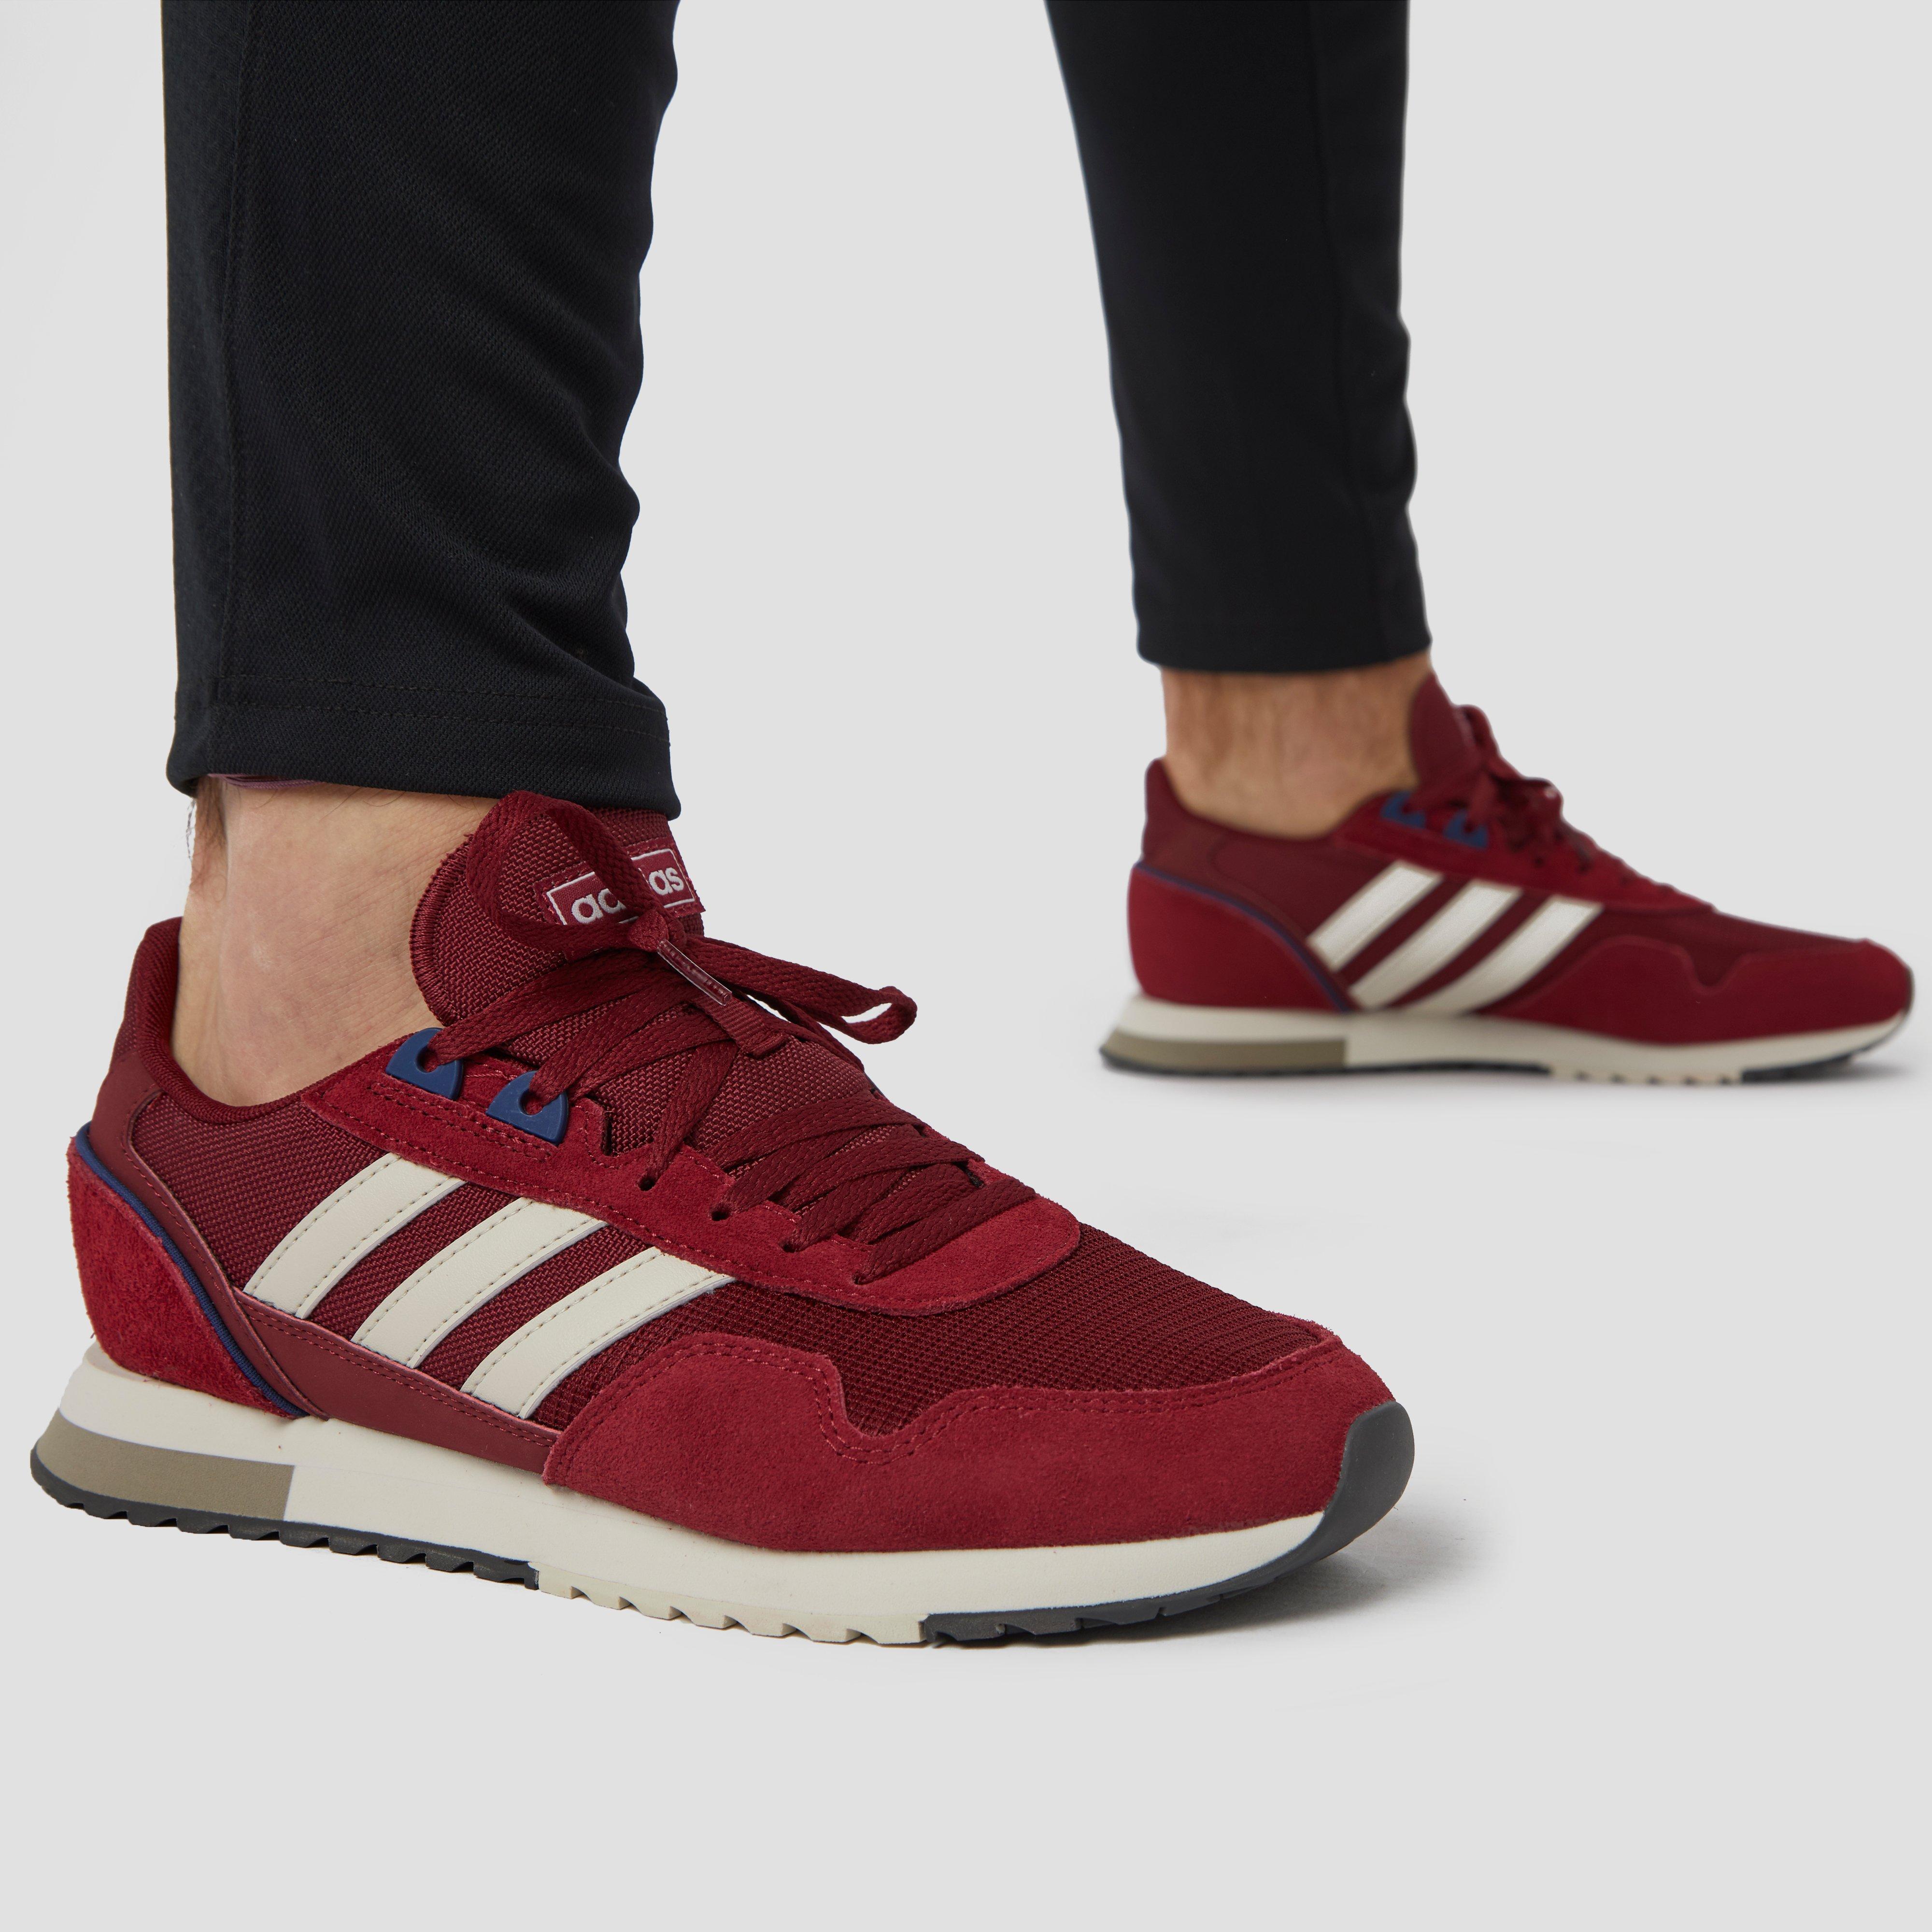 Irrigatie toegang In detail adidas sneakers bordeaux rood, Off 73%, www.iusarecords.com